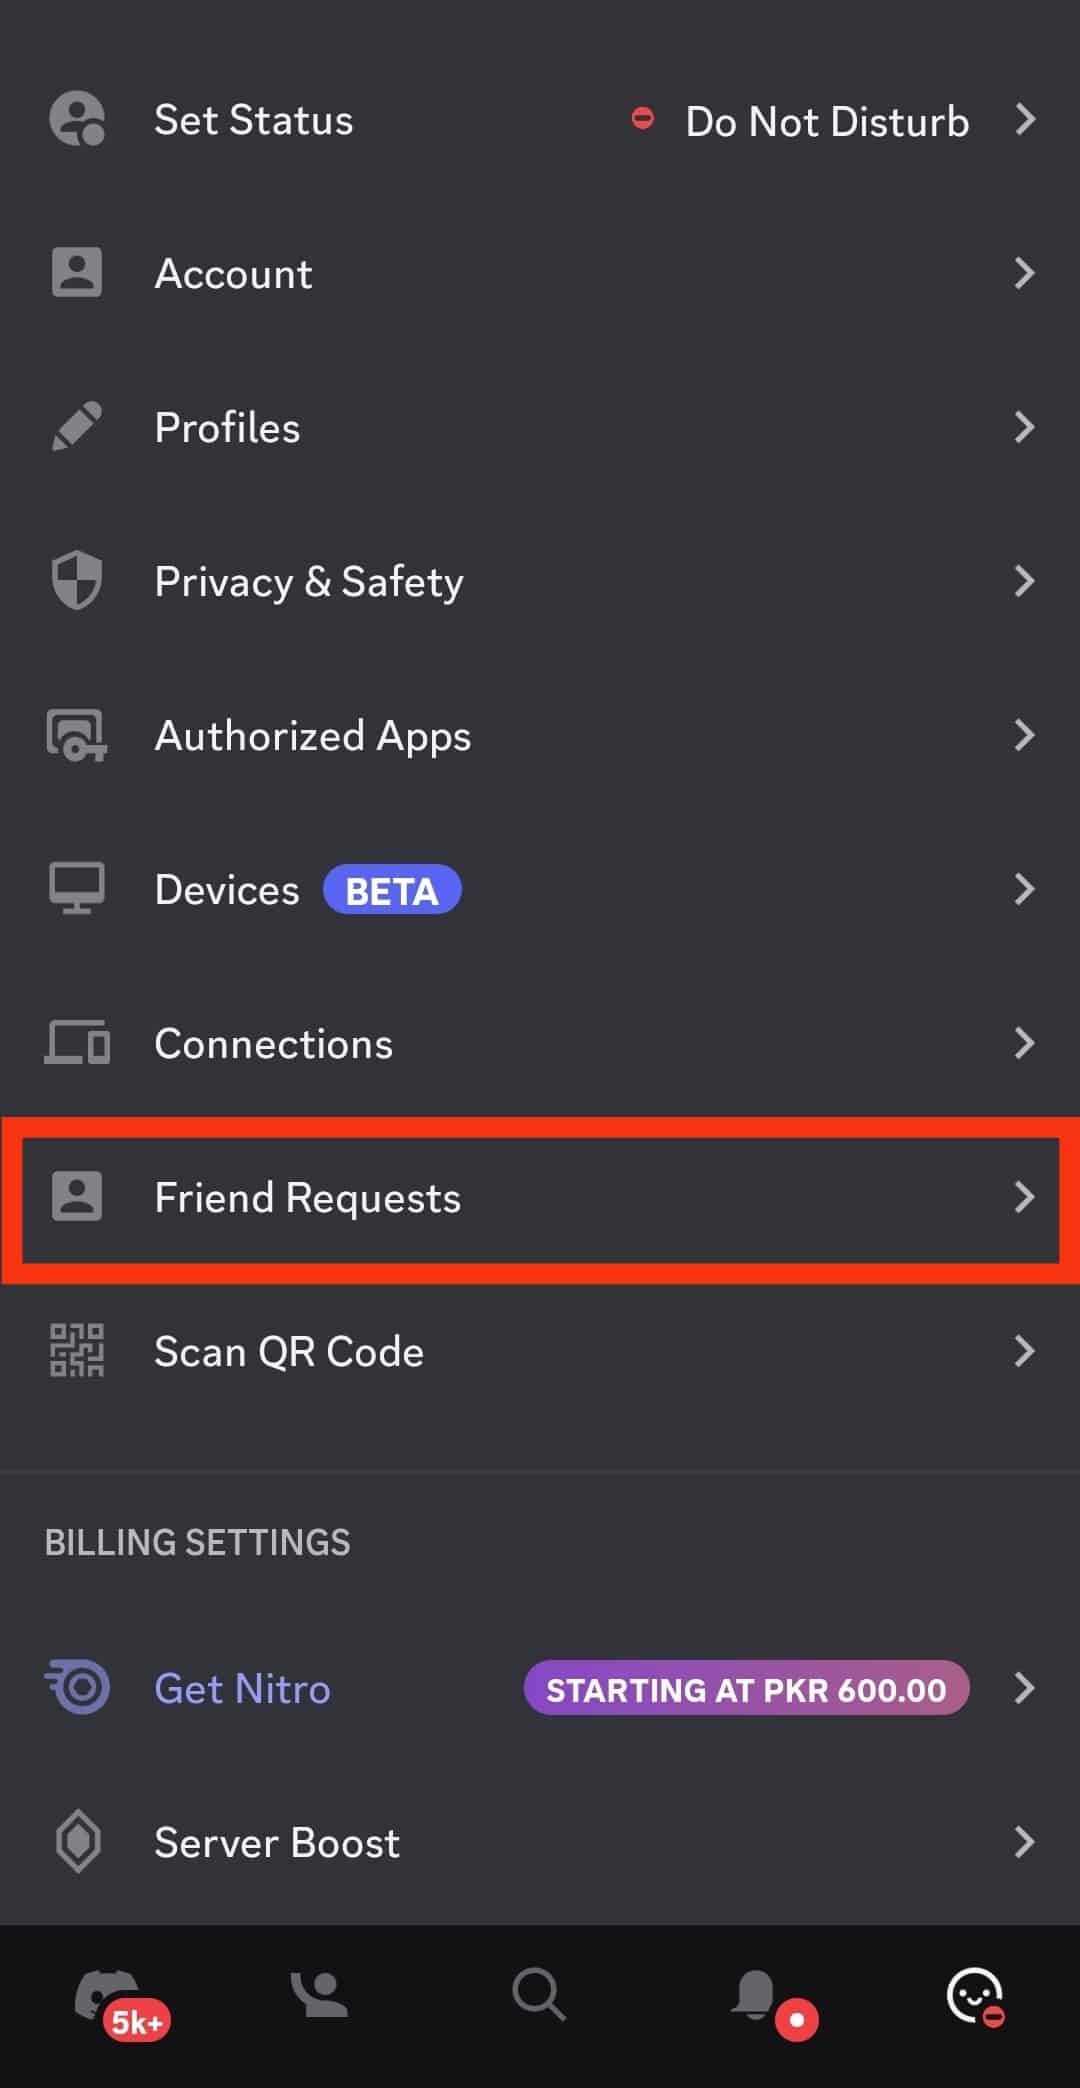 Go To The Friend Request Option